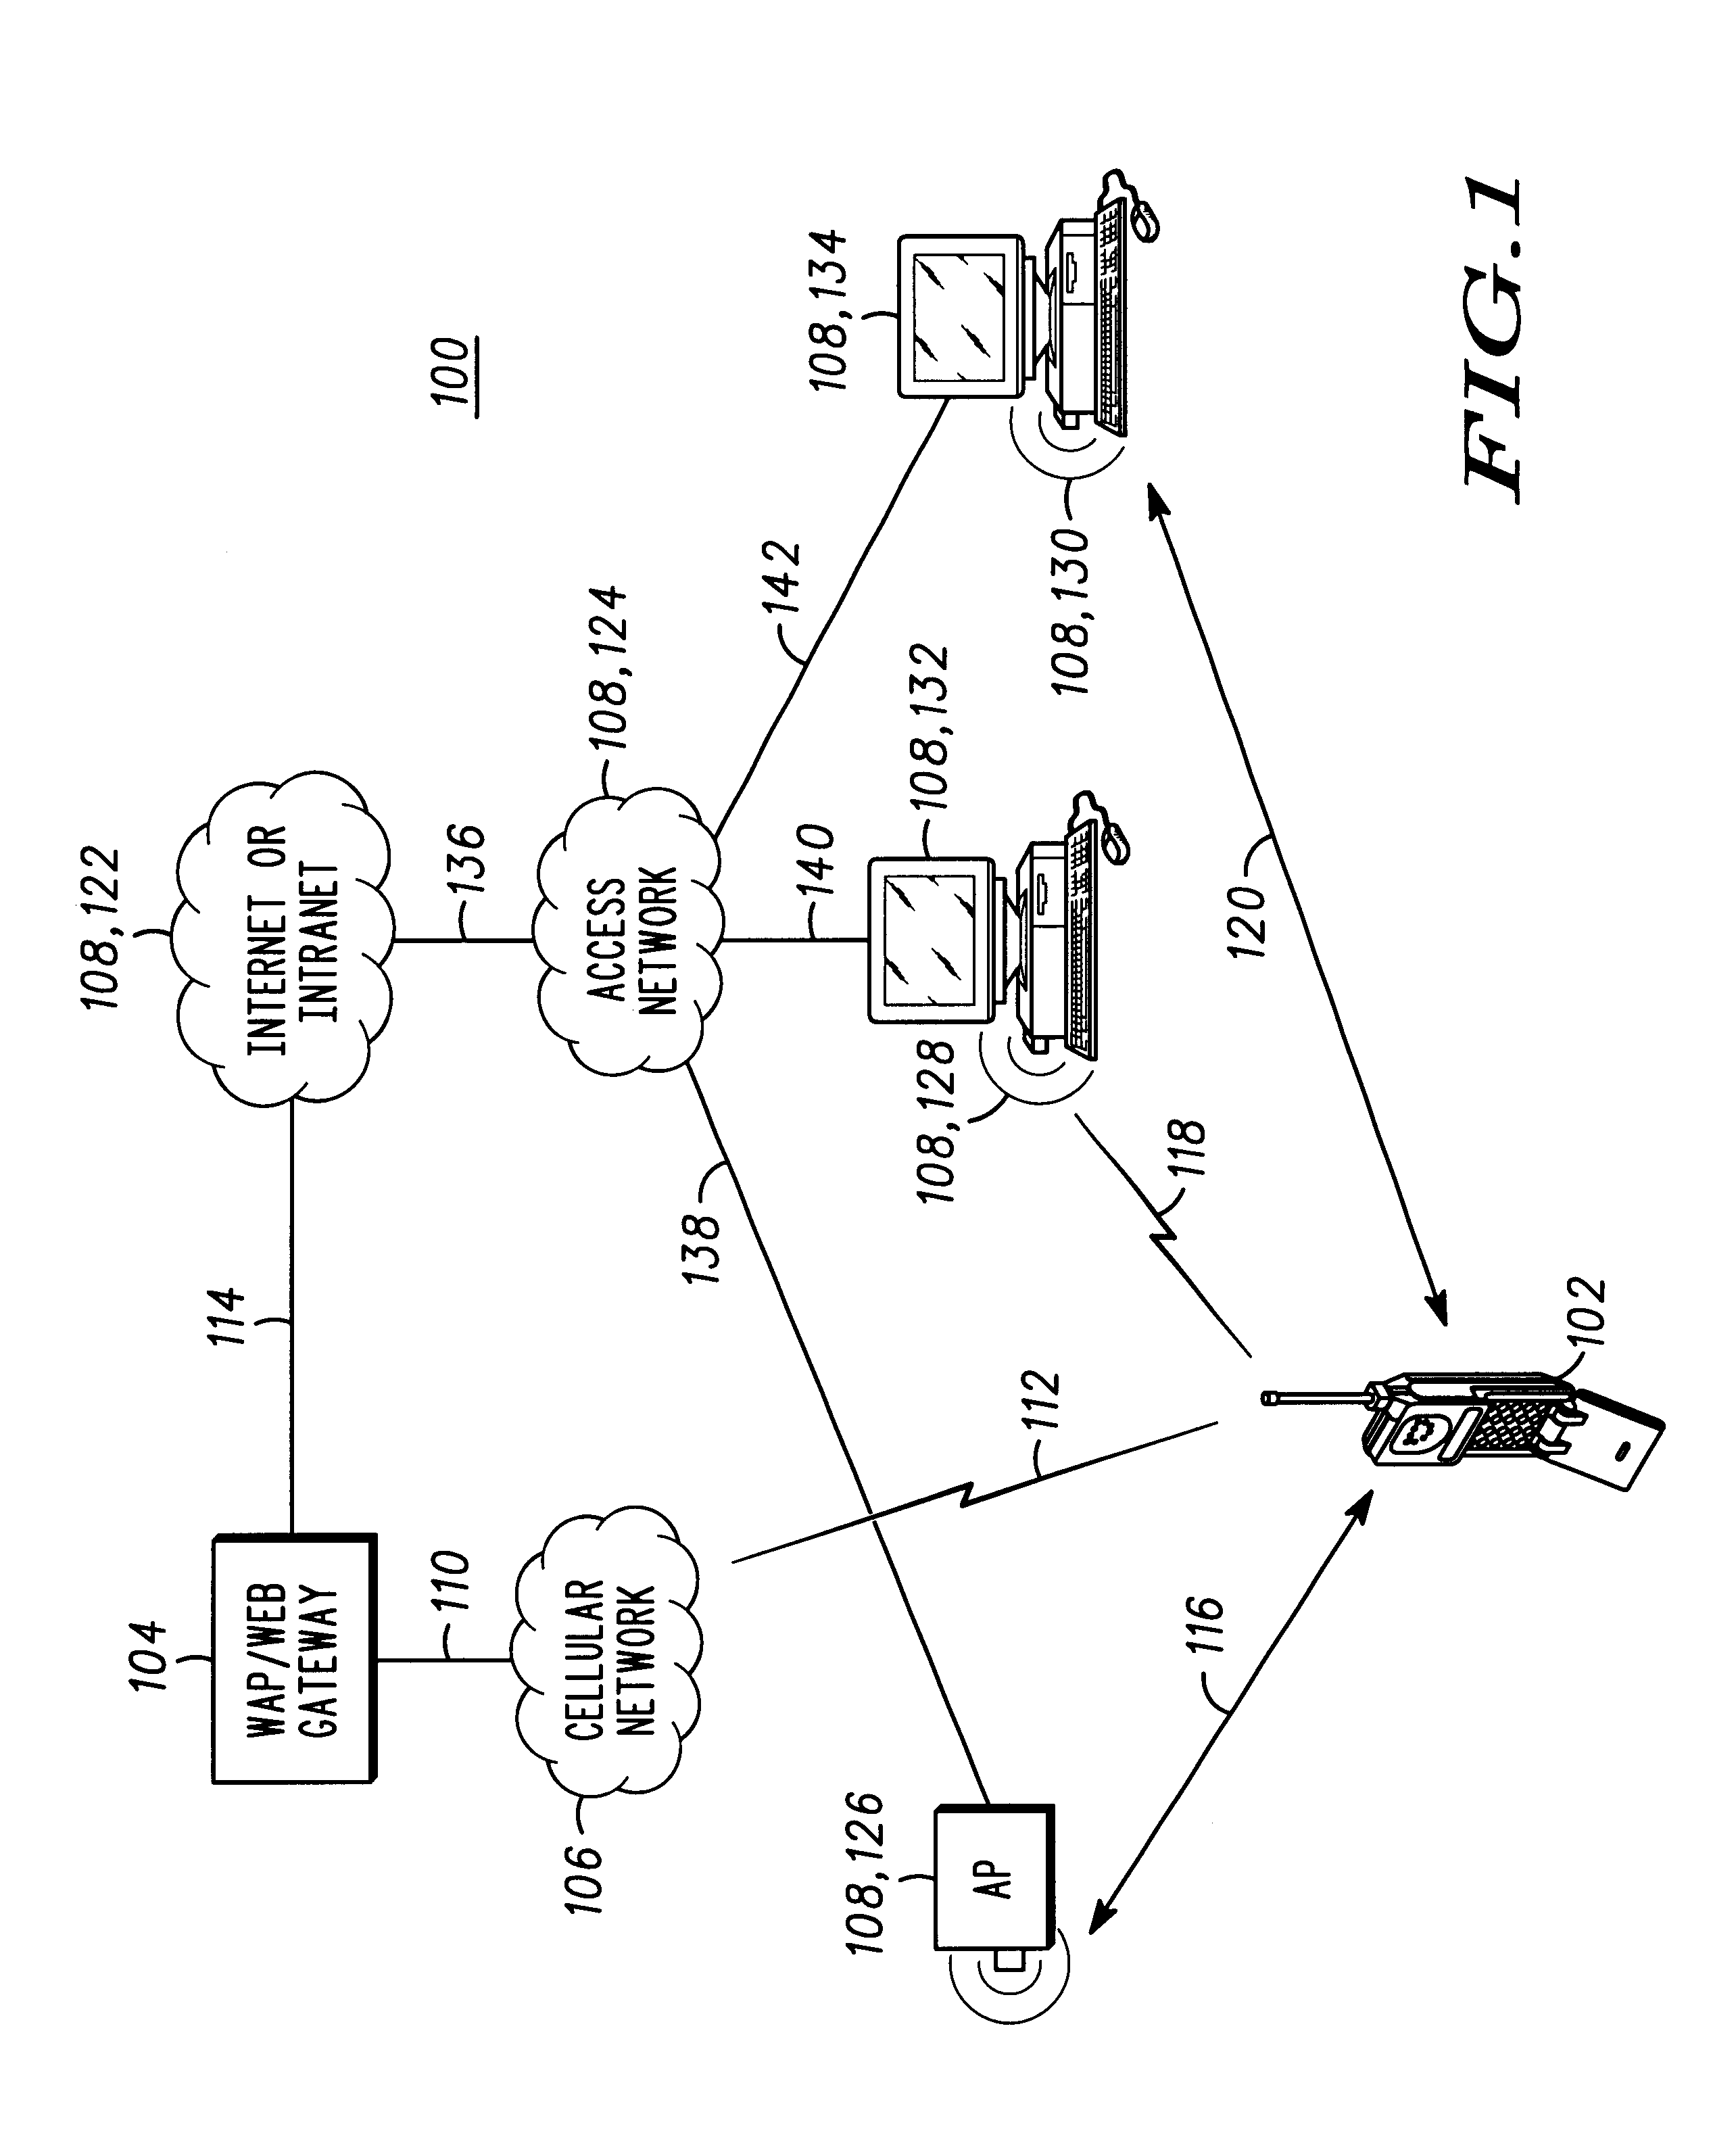 Method and apparatus for splitting control and media content from a cellular network connection